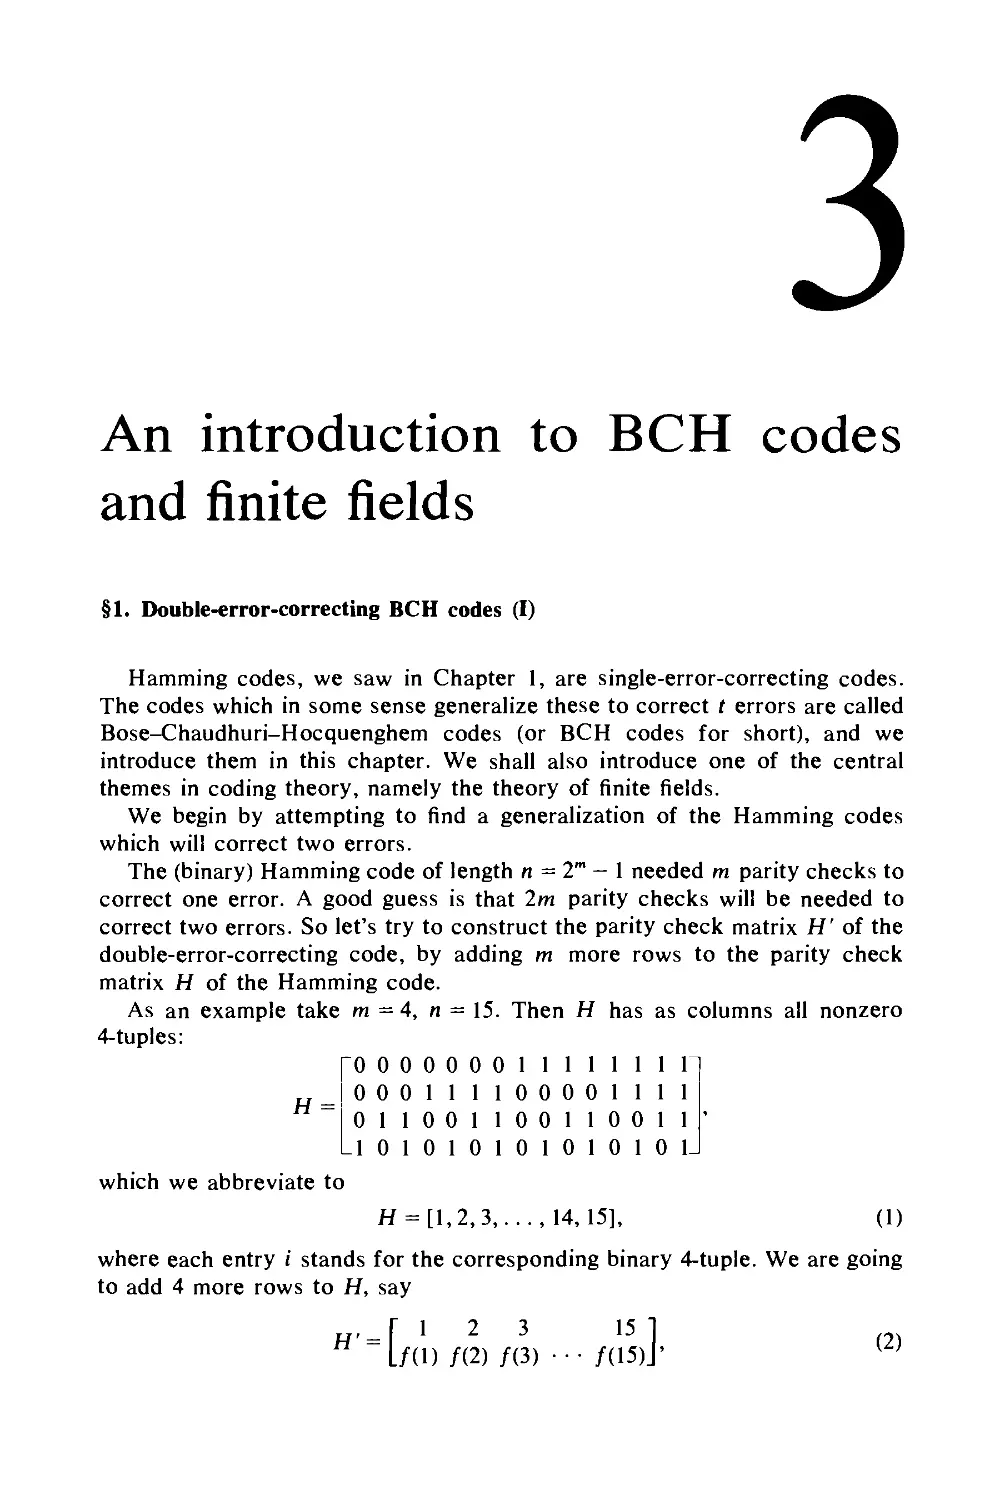 3. An introduction to BCH codes and finite fields